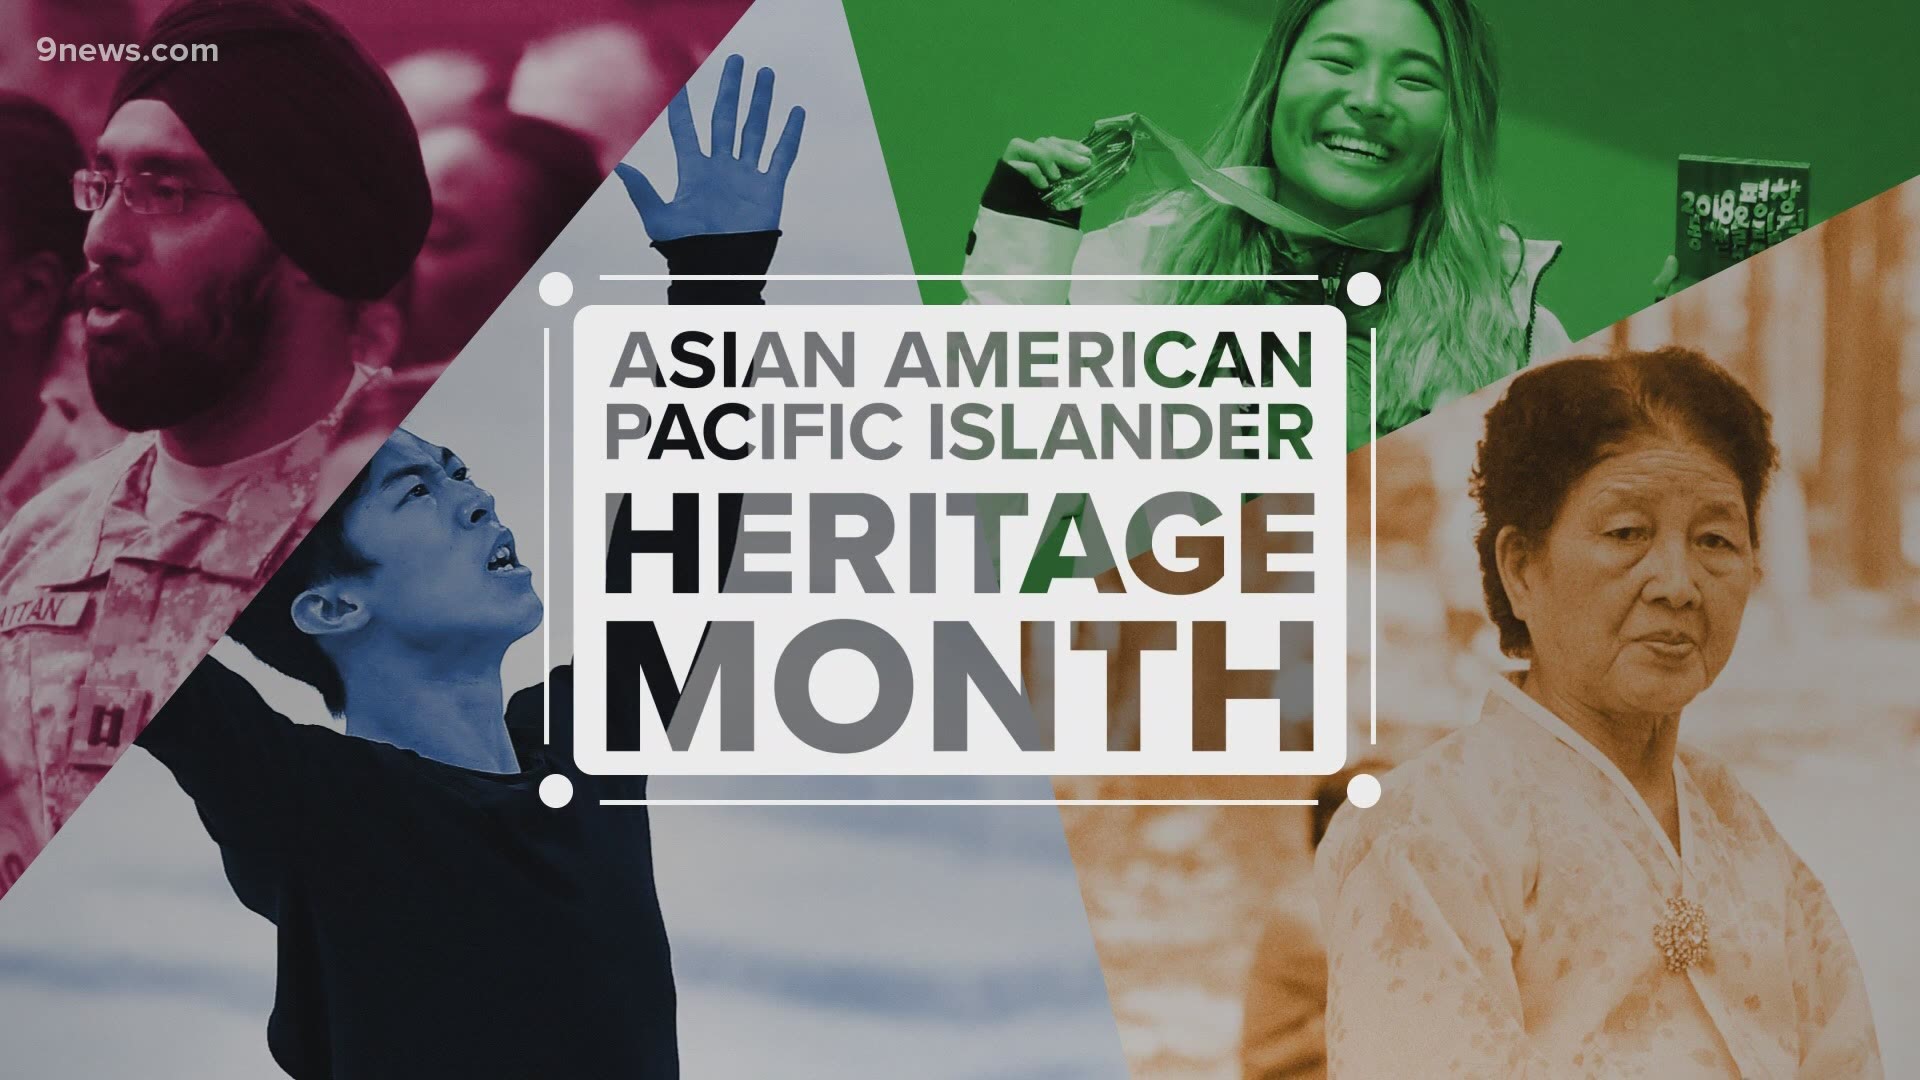 The Asian American Collective is focusing on increasing the connection to and representation of Asian Americans and Pacific Islanders and in the media.